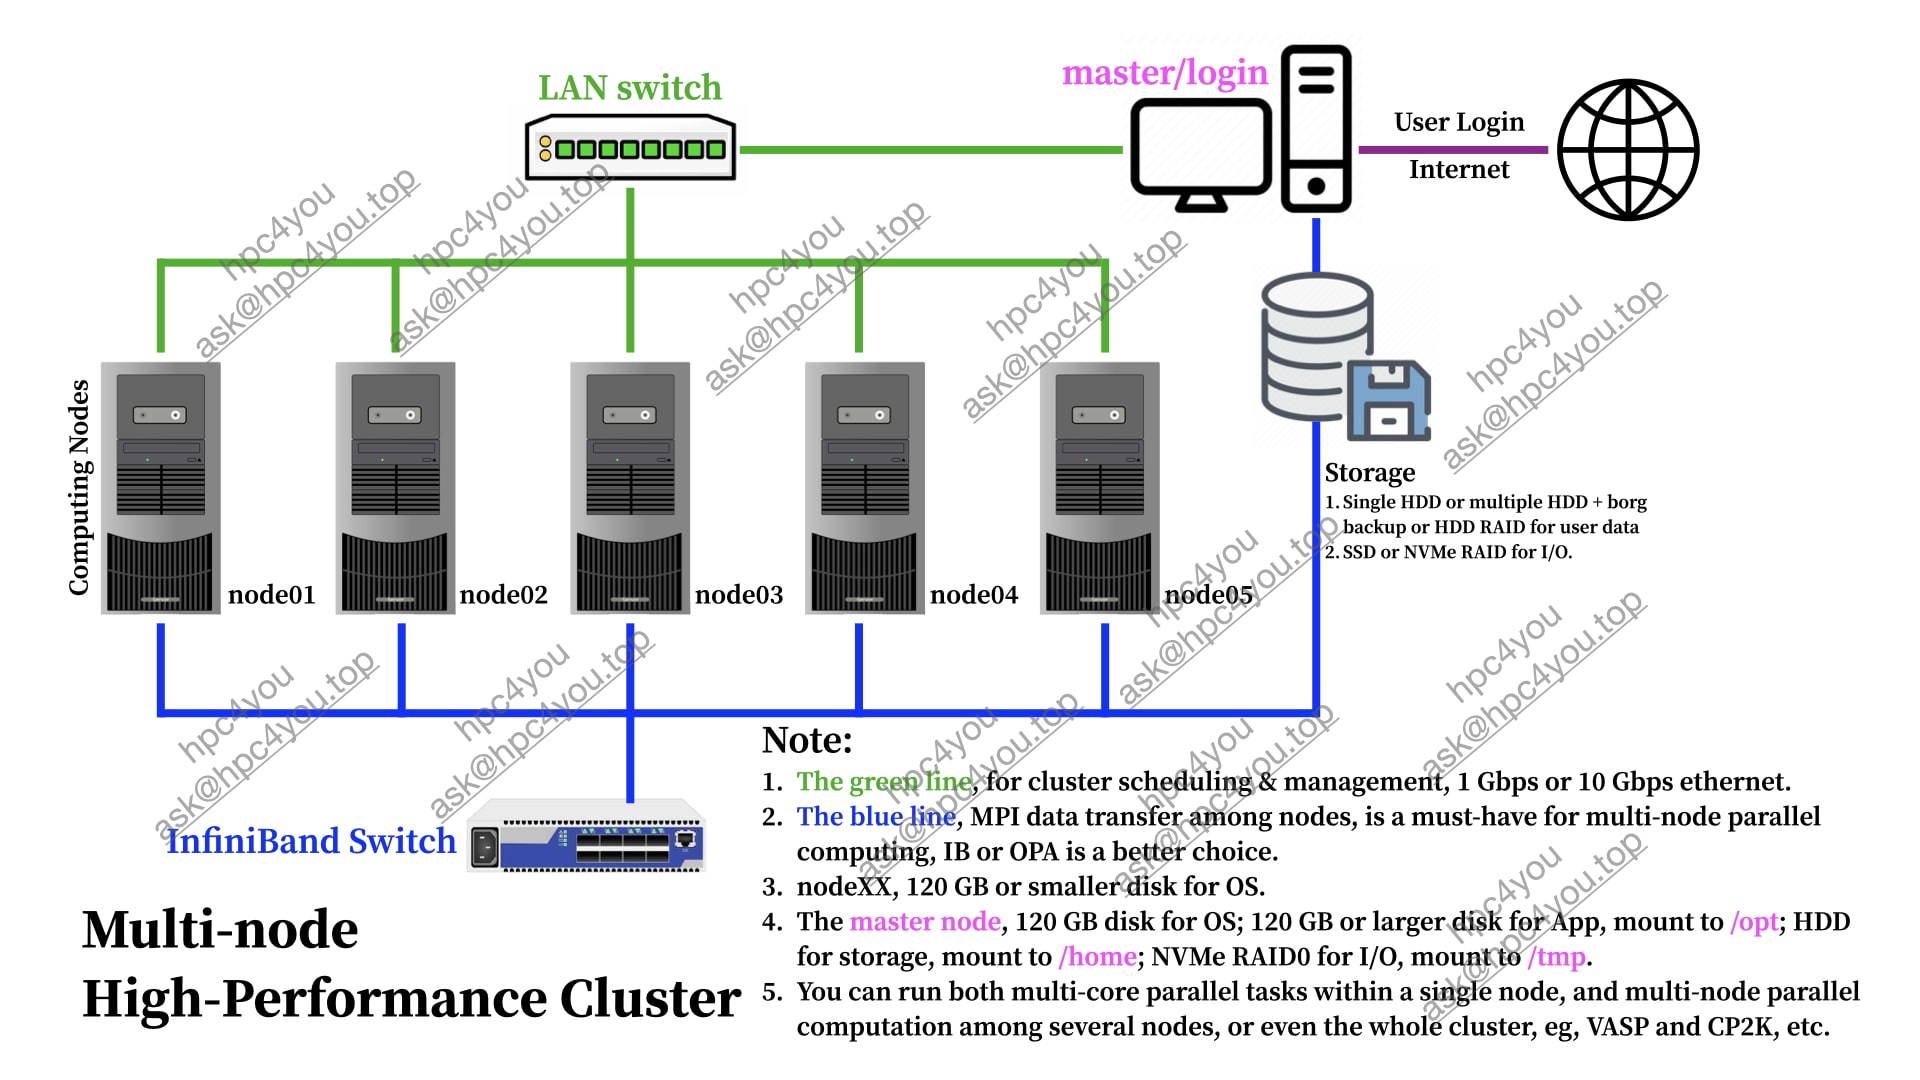 High-Performance Cluster